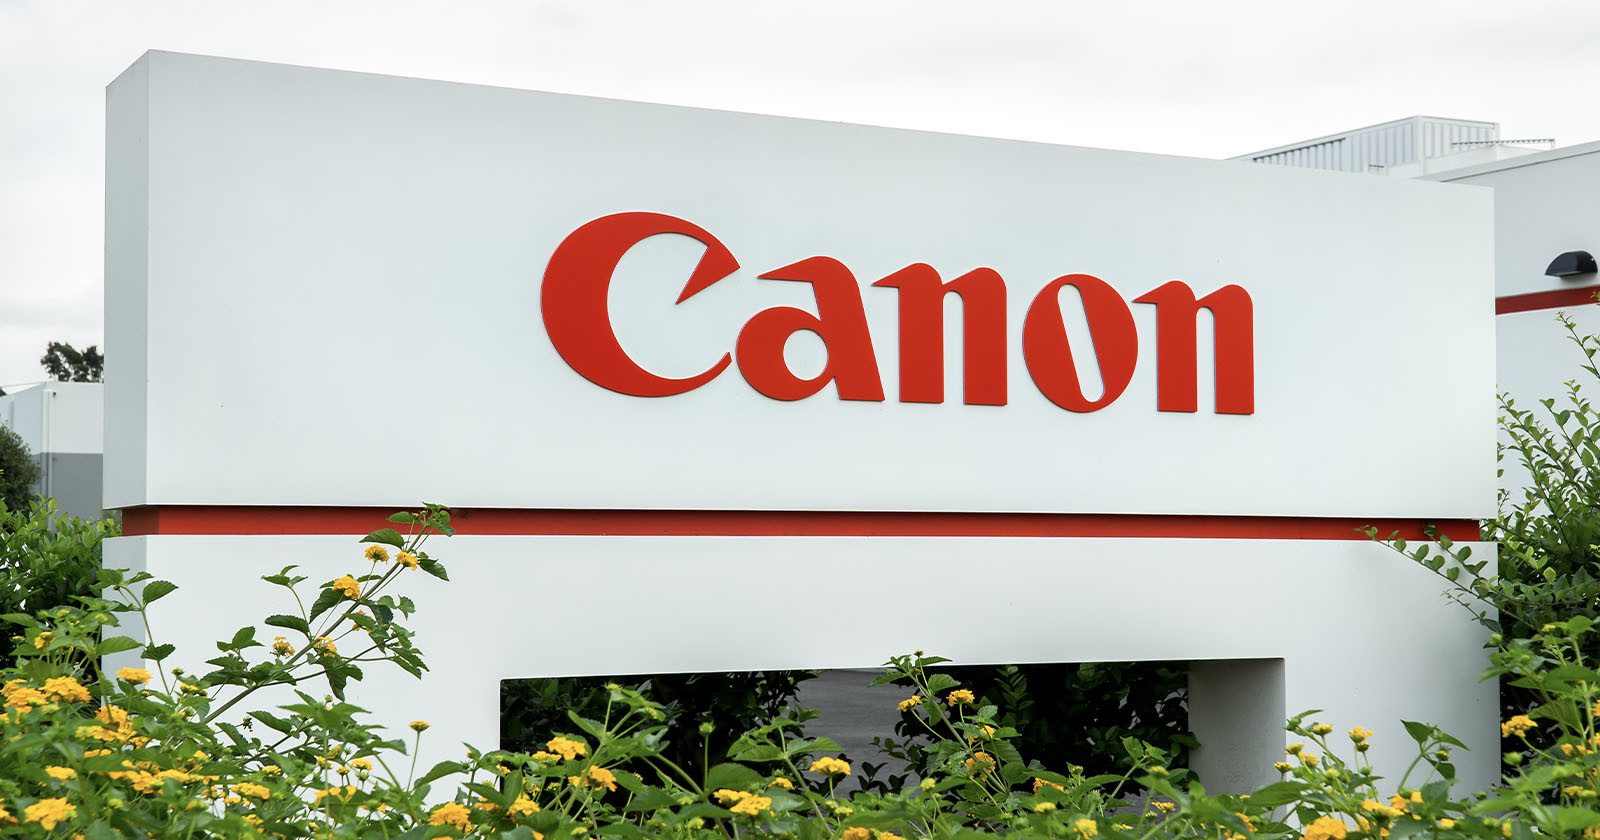  canon riding rising market cameras sell well 